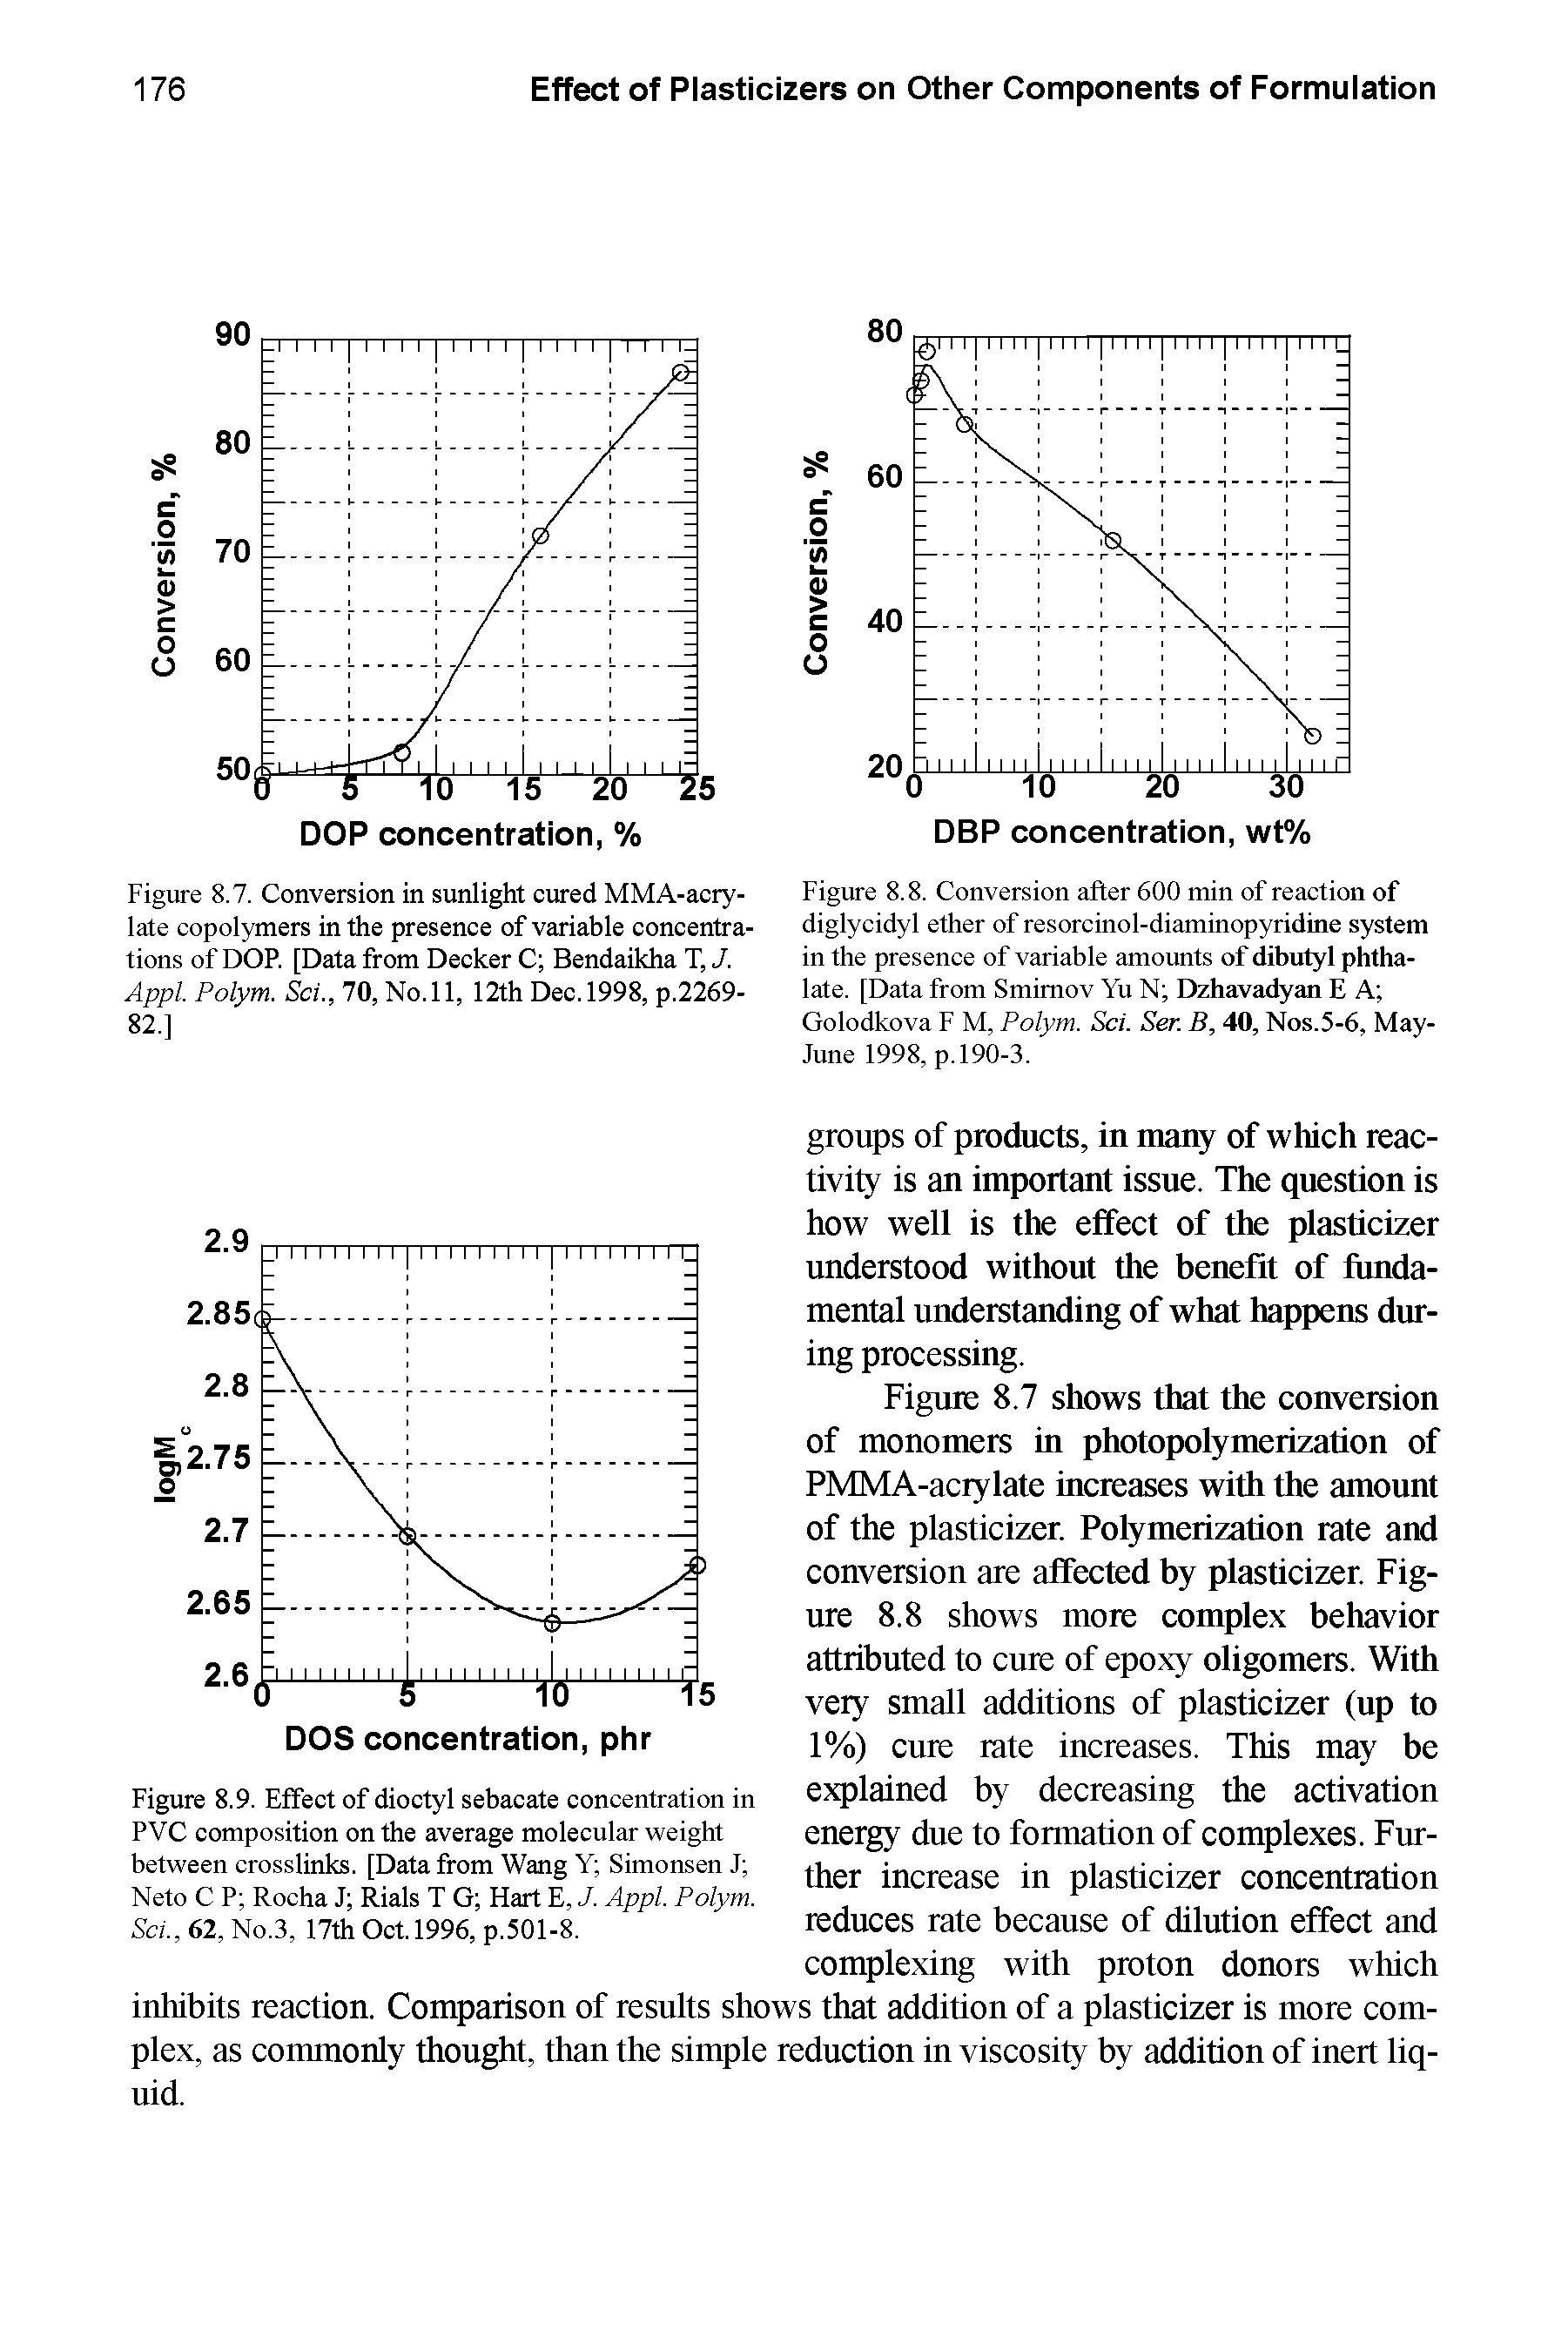 Figure 8.8. Conversion after 600 min of reaction of diglycidyl ether of resorcinol-diaminopyridine system in the presence of variable amounts of dibutyl phtha-late. [Data from Smirnov Yu N Dzhavadyan E A Golodkova F M, Polym. Sci. Sen B, 40, Nos.5-6, May-June 1998, p. 190-3.